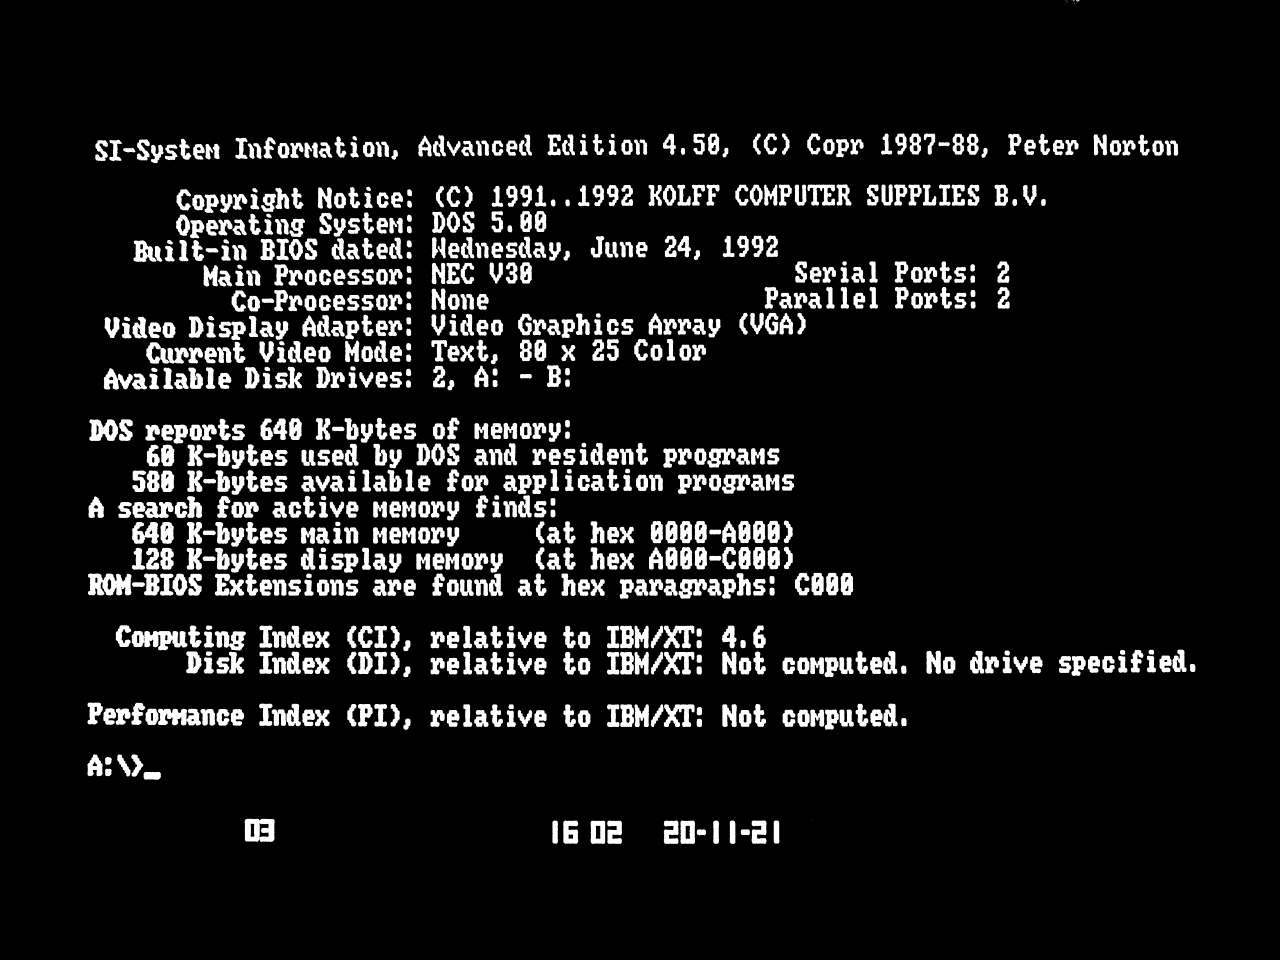 MS-DOS Screenshot of the KCS Power PC Board running the SI tool from Norton Utilities giving a computing index of 4.6